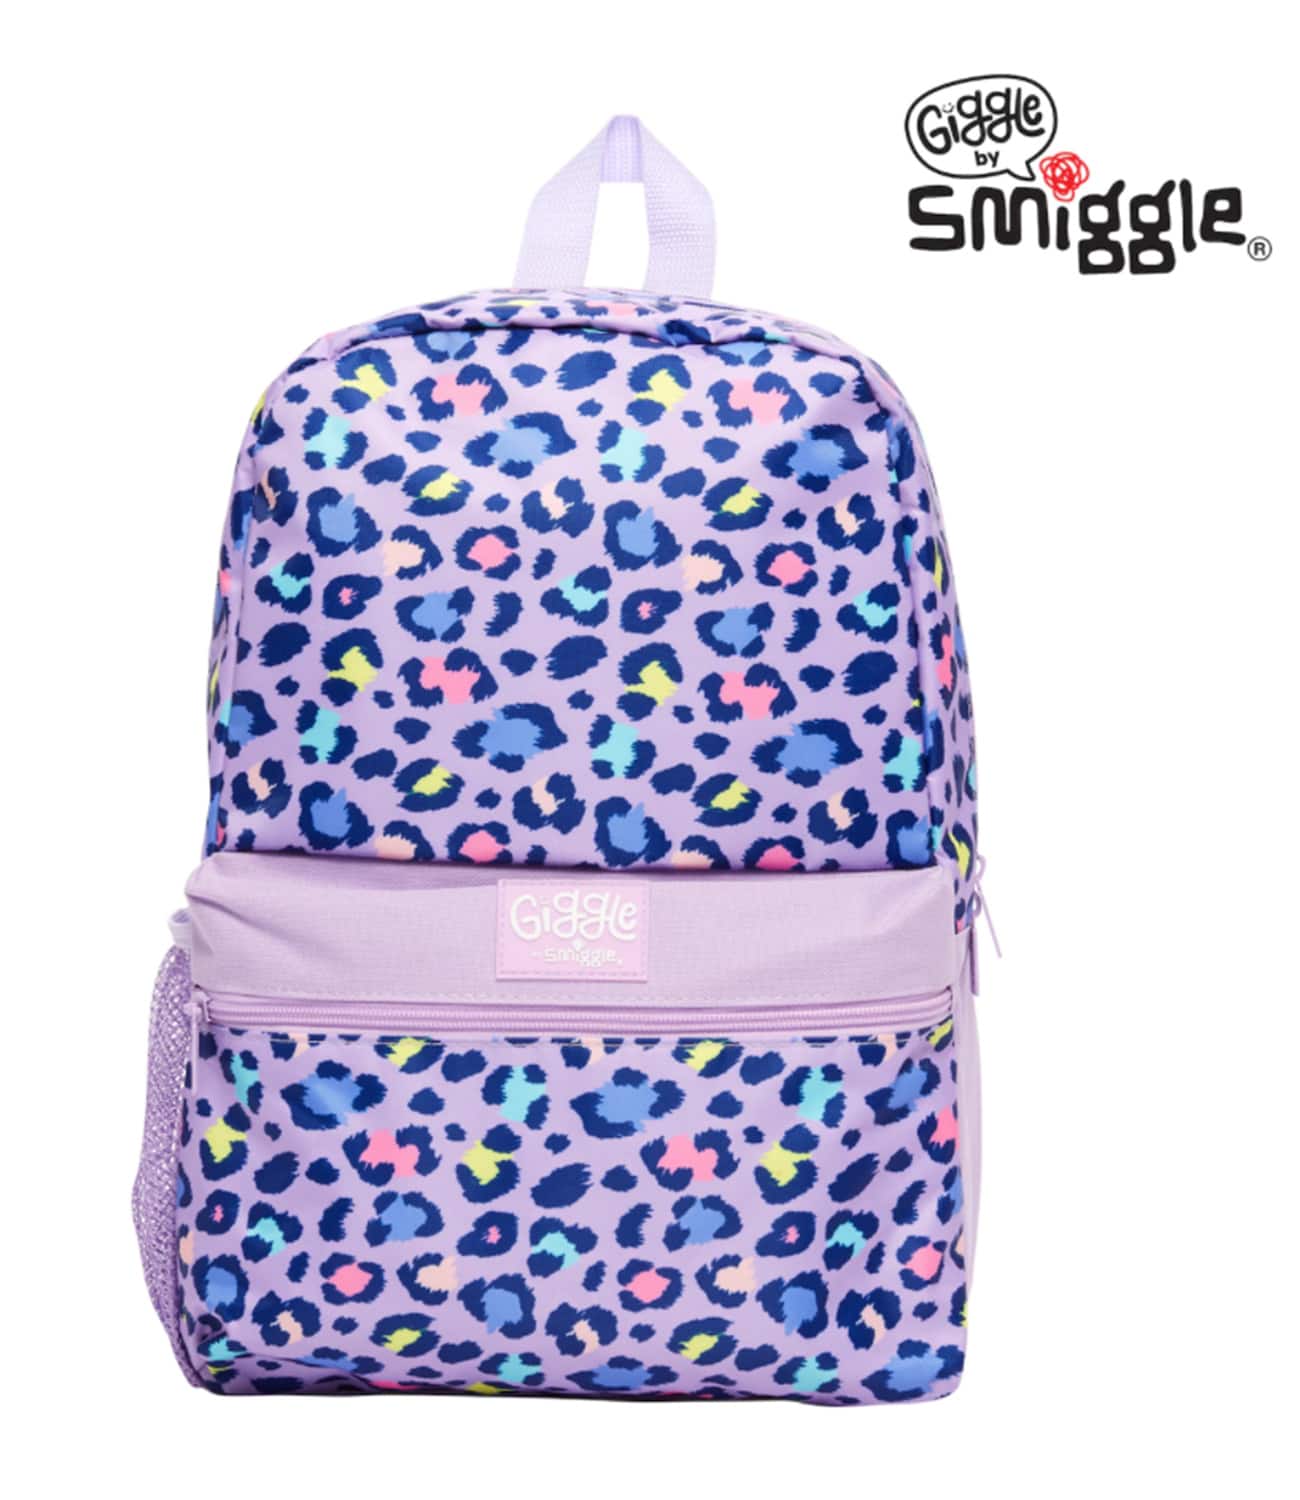 Giggle by Smiggle 2 Backpack